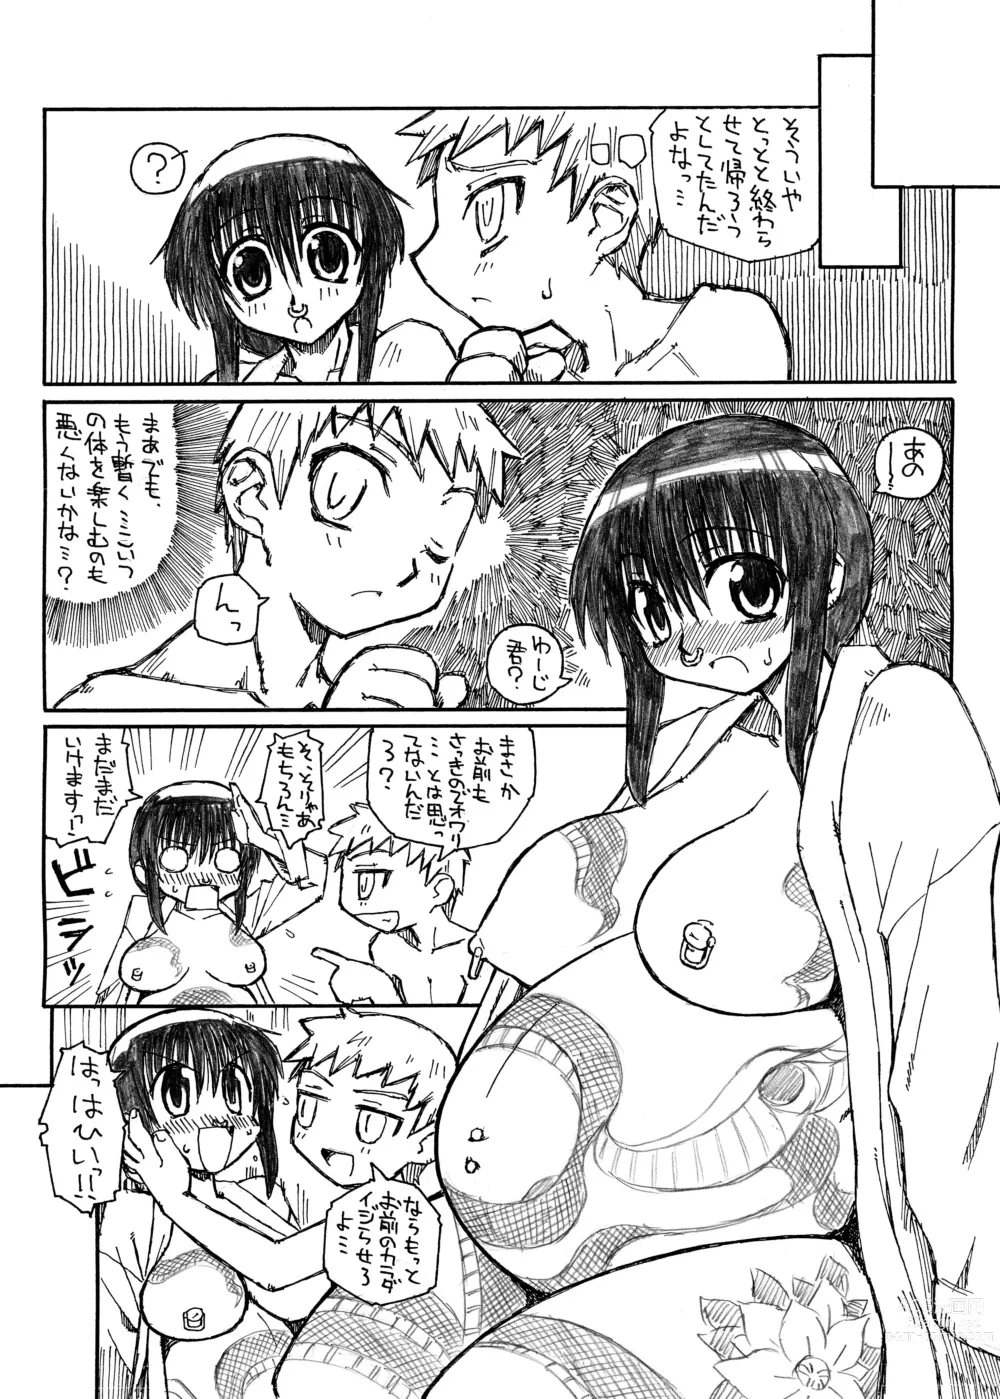 Page 18 of doujinshi Pregnant Summer